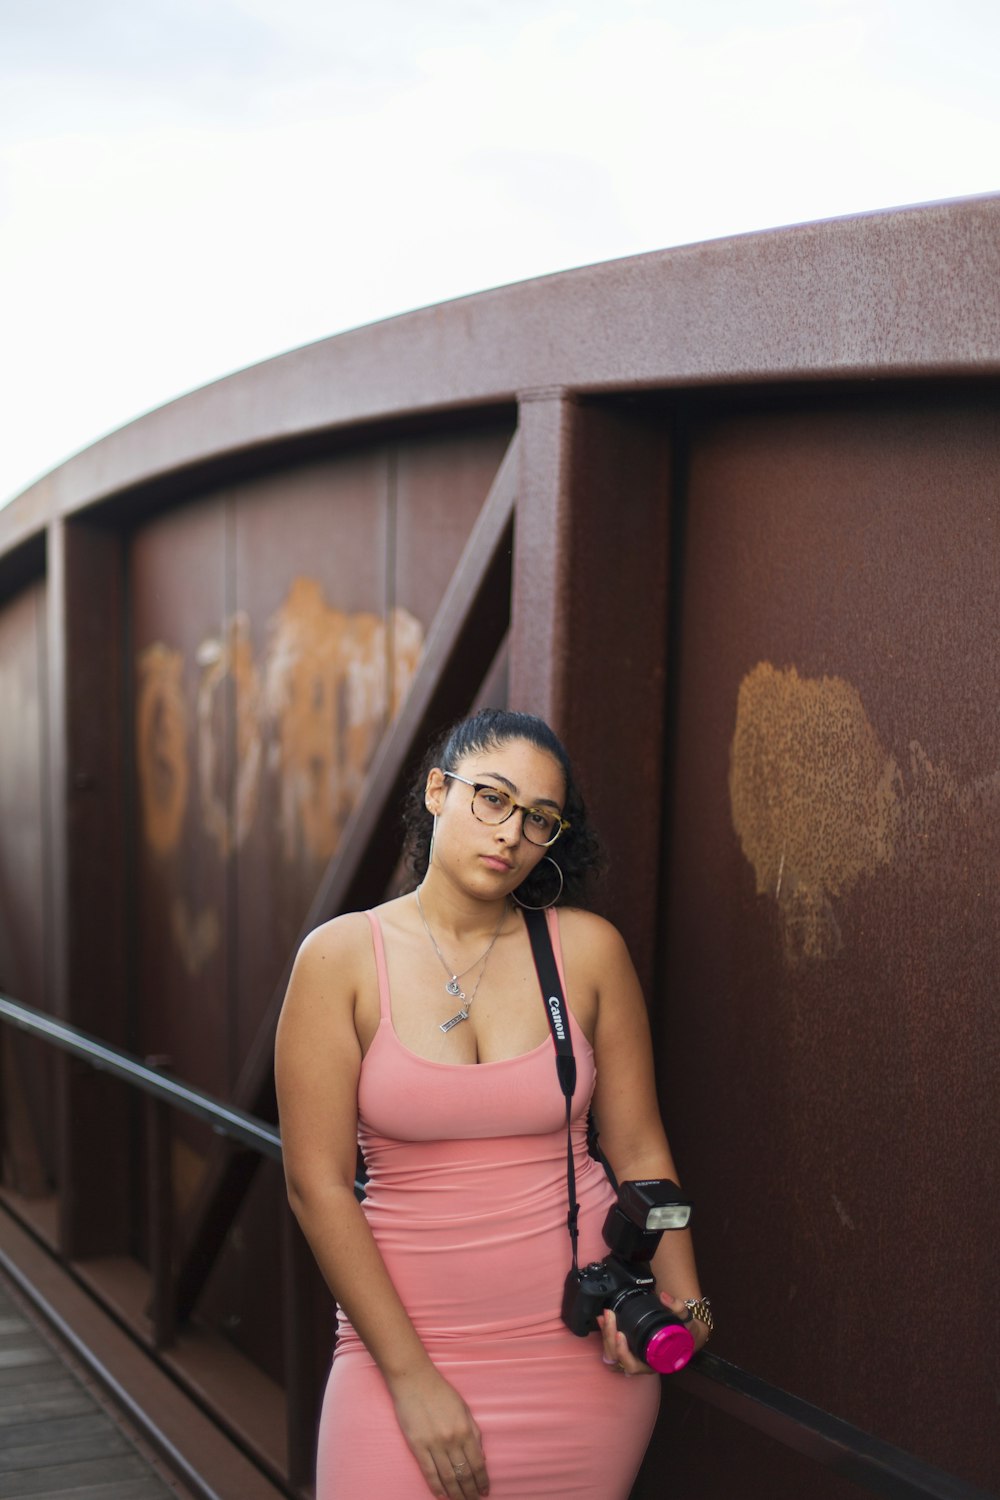 woman in pink tank top wearing black sunglasses standing beside brown wooden wall during daytime